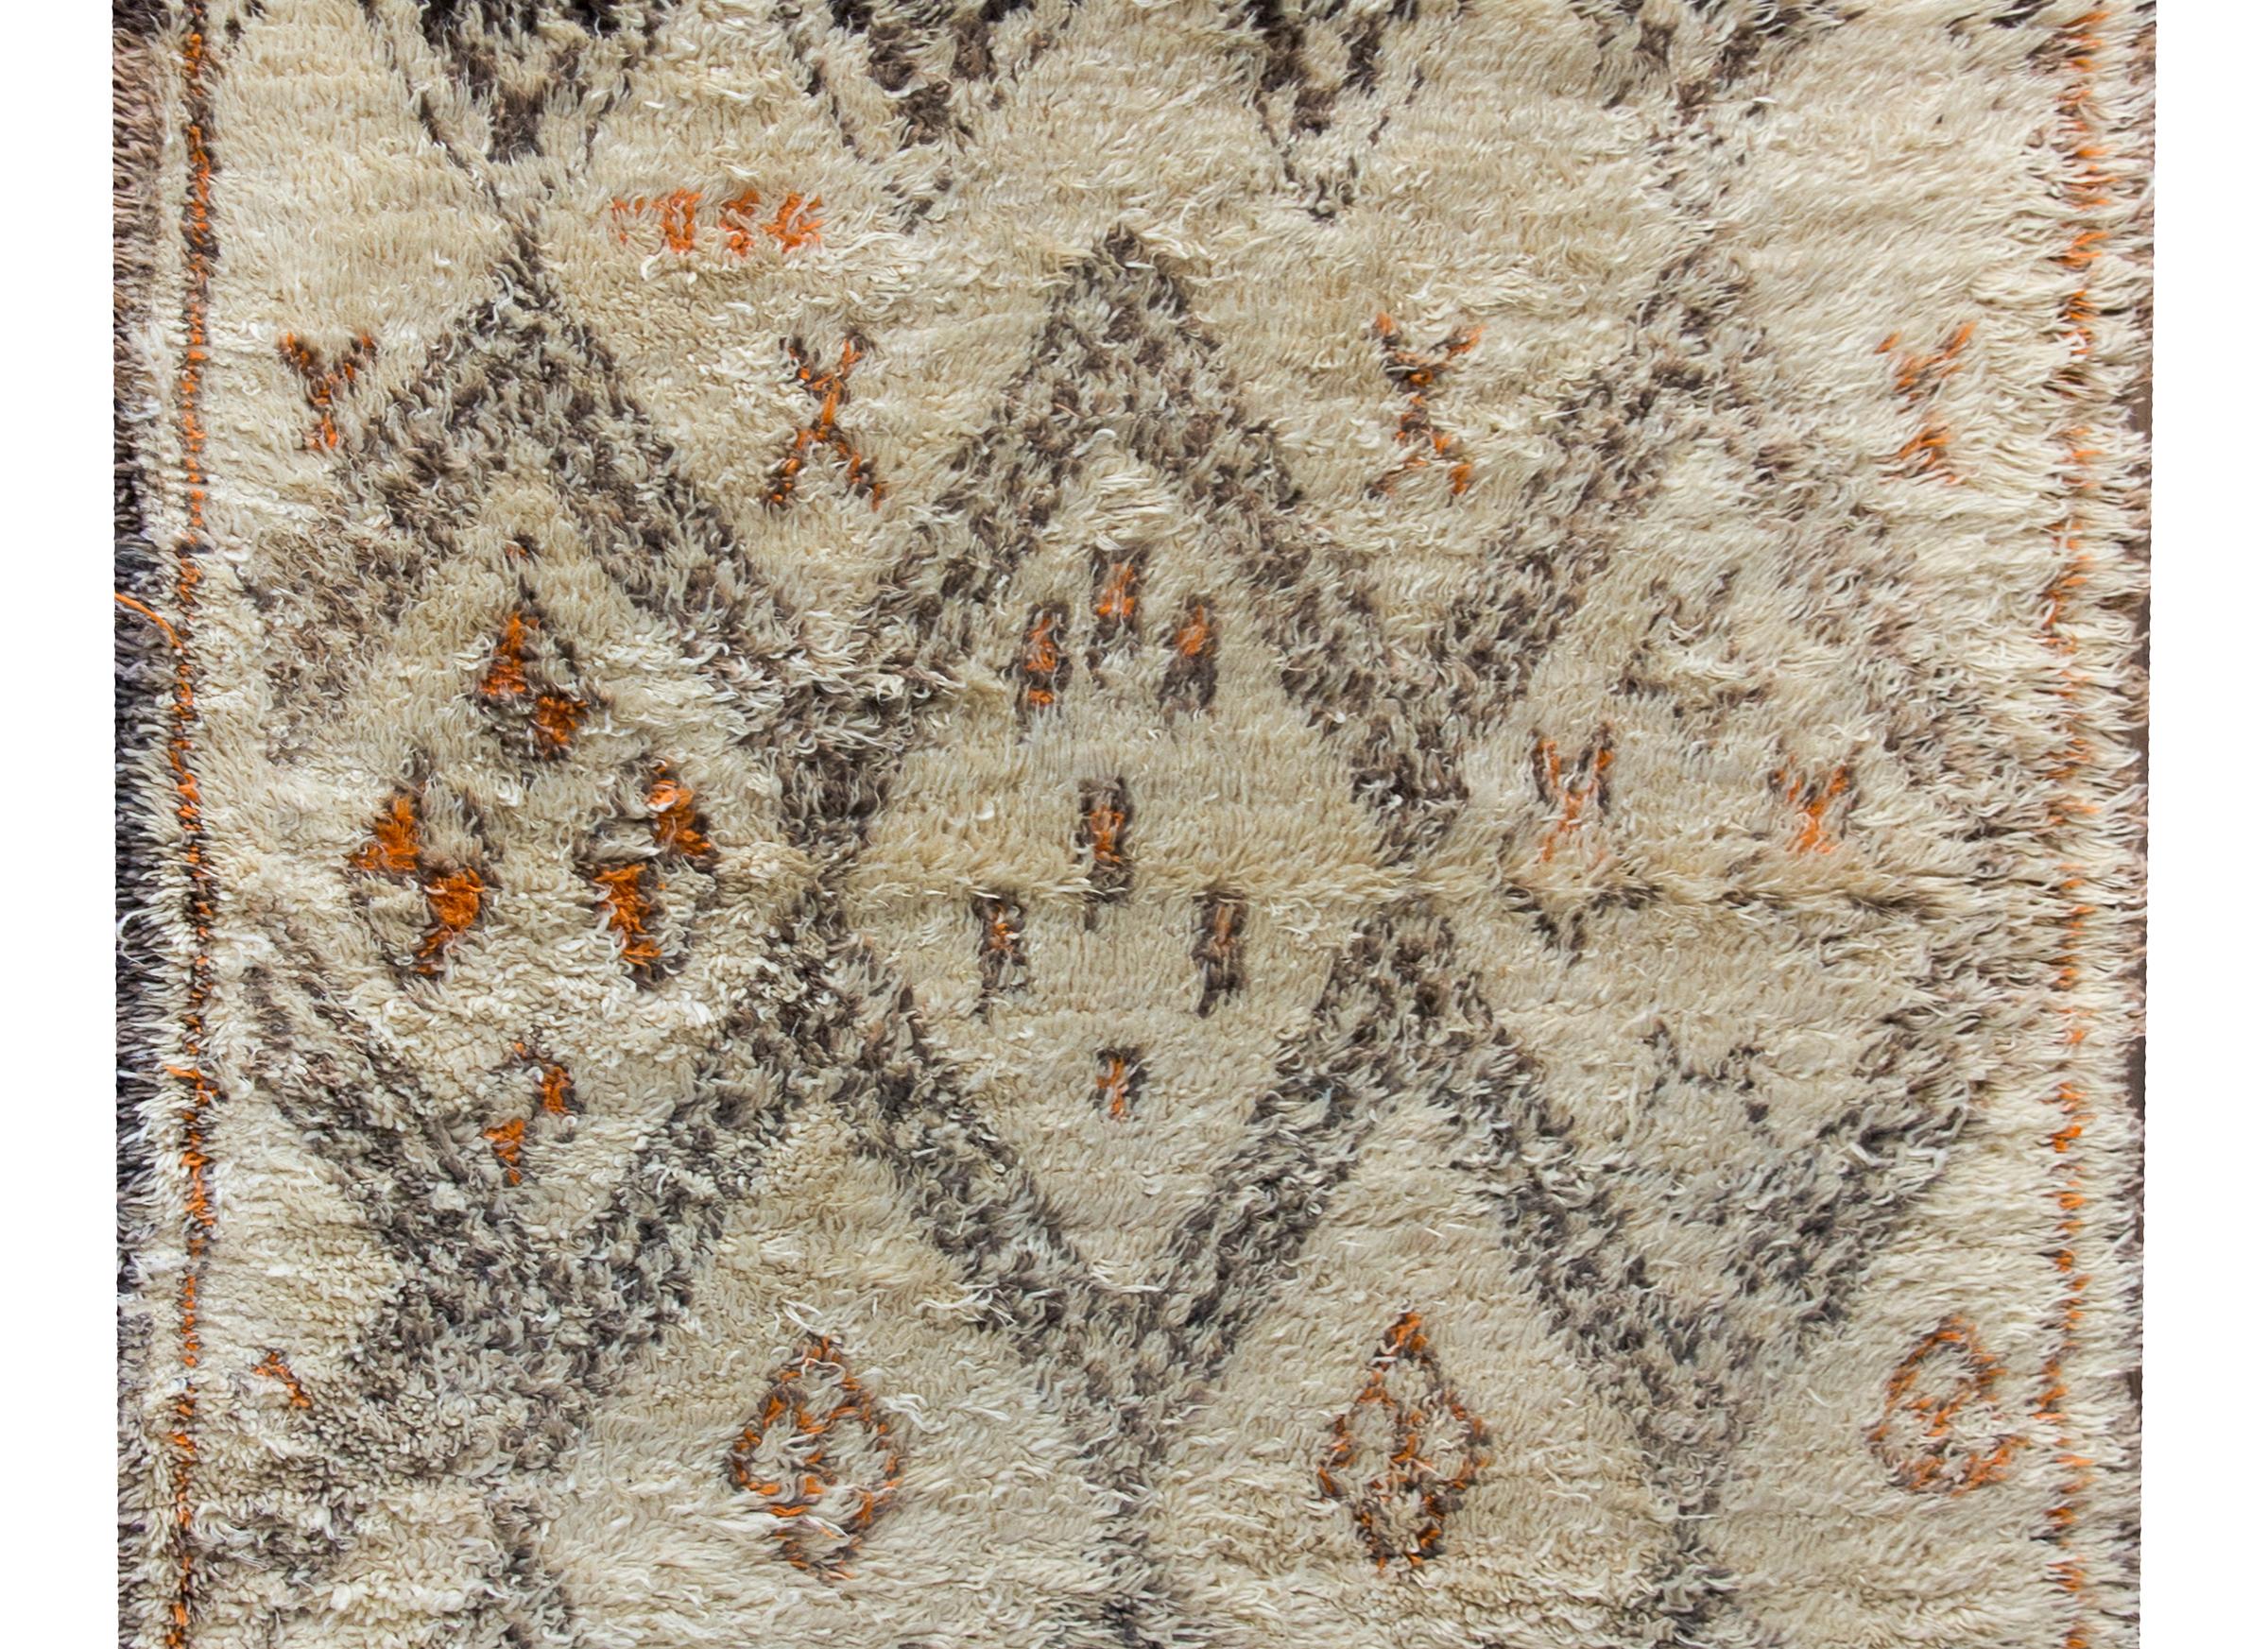 A chic and bold mid-20th century Moroccan rug with an all-over geometric partner including large and small diamonds on one end, and zigzag stripes on the other, and all woven in brown and orange wool set against a natural cream colored wool ground.